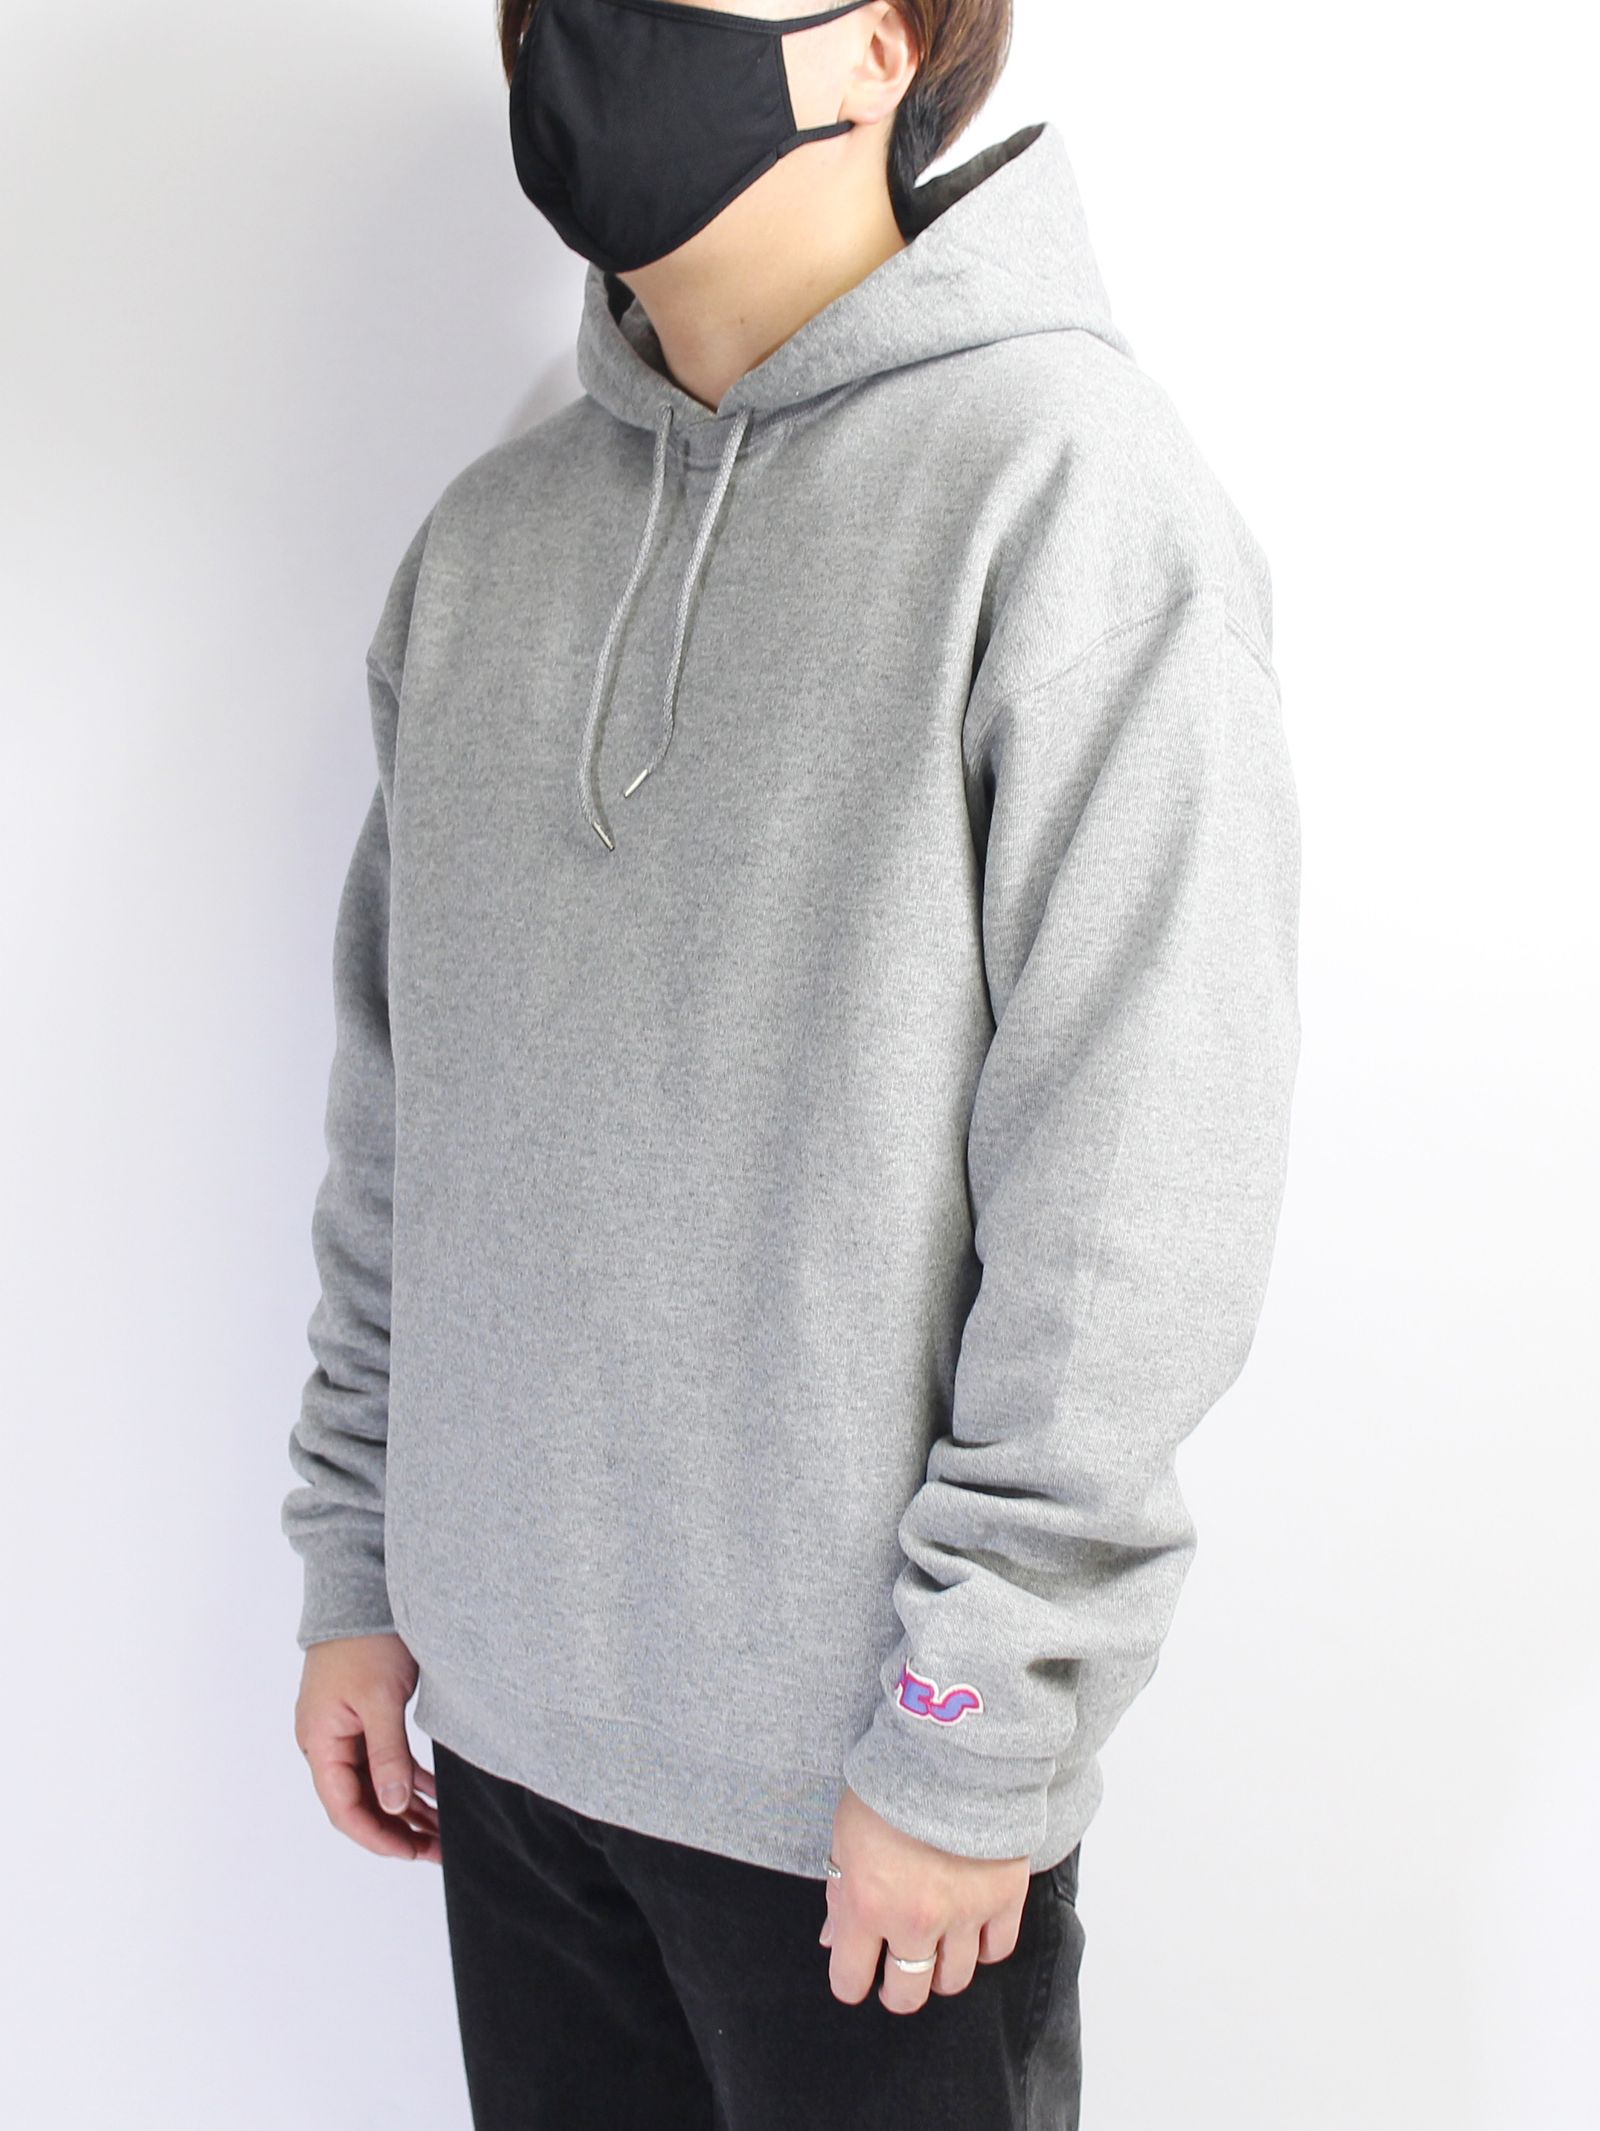 SEVEN BY SEVEN - リバーシブルフーディ - REVERSIBLE HOODIE